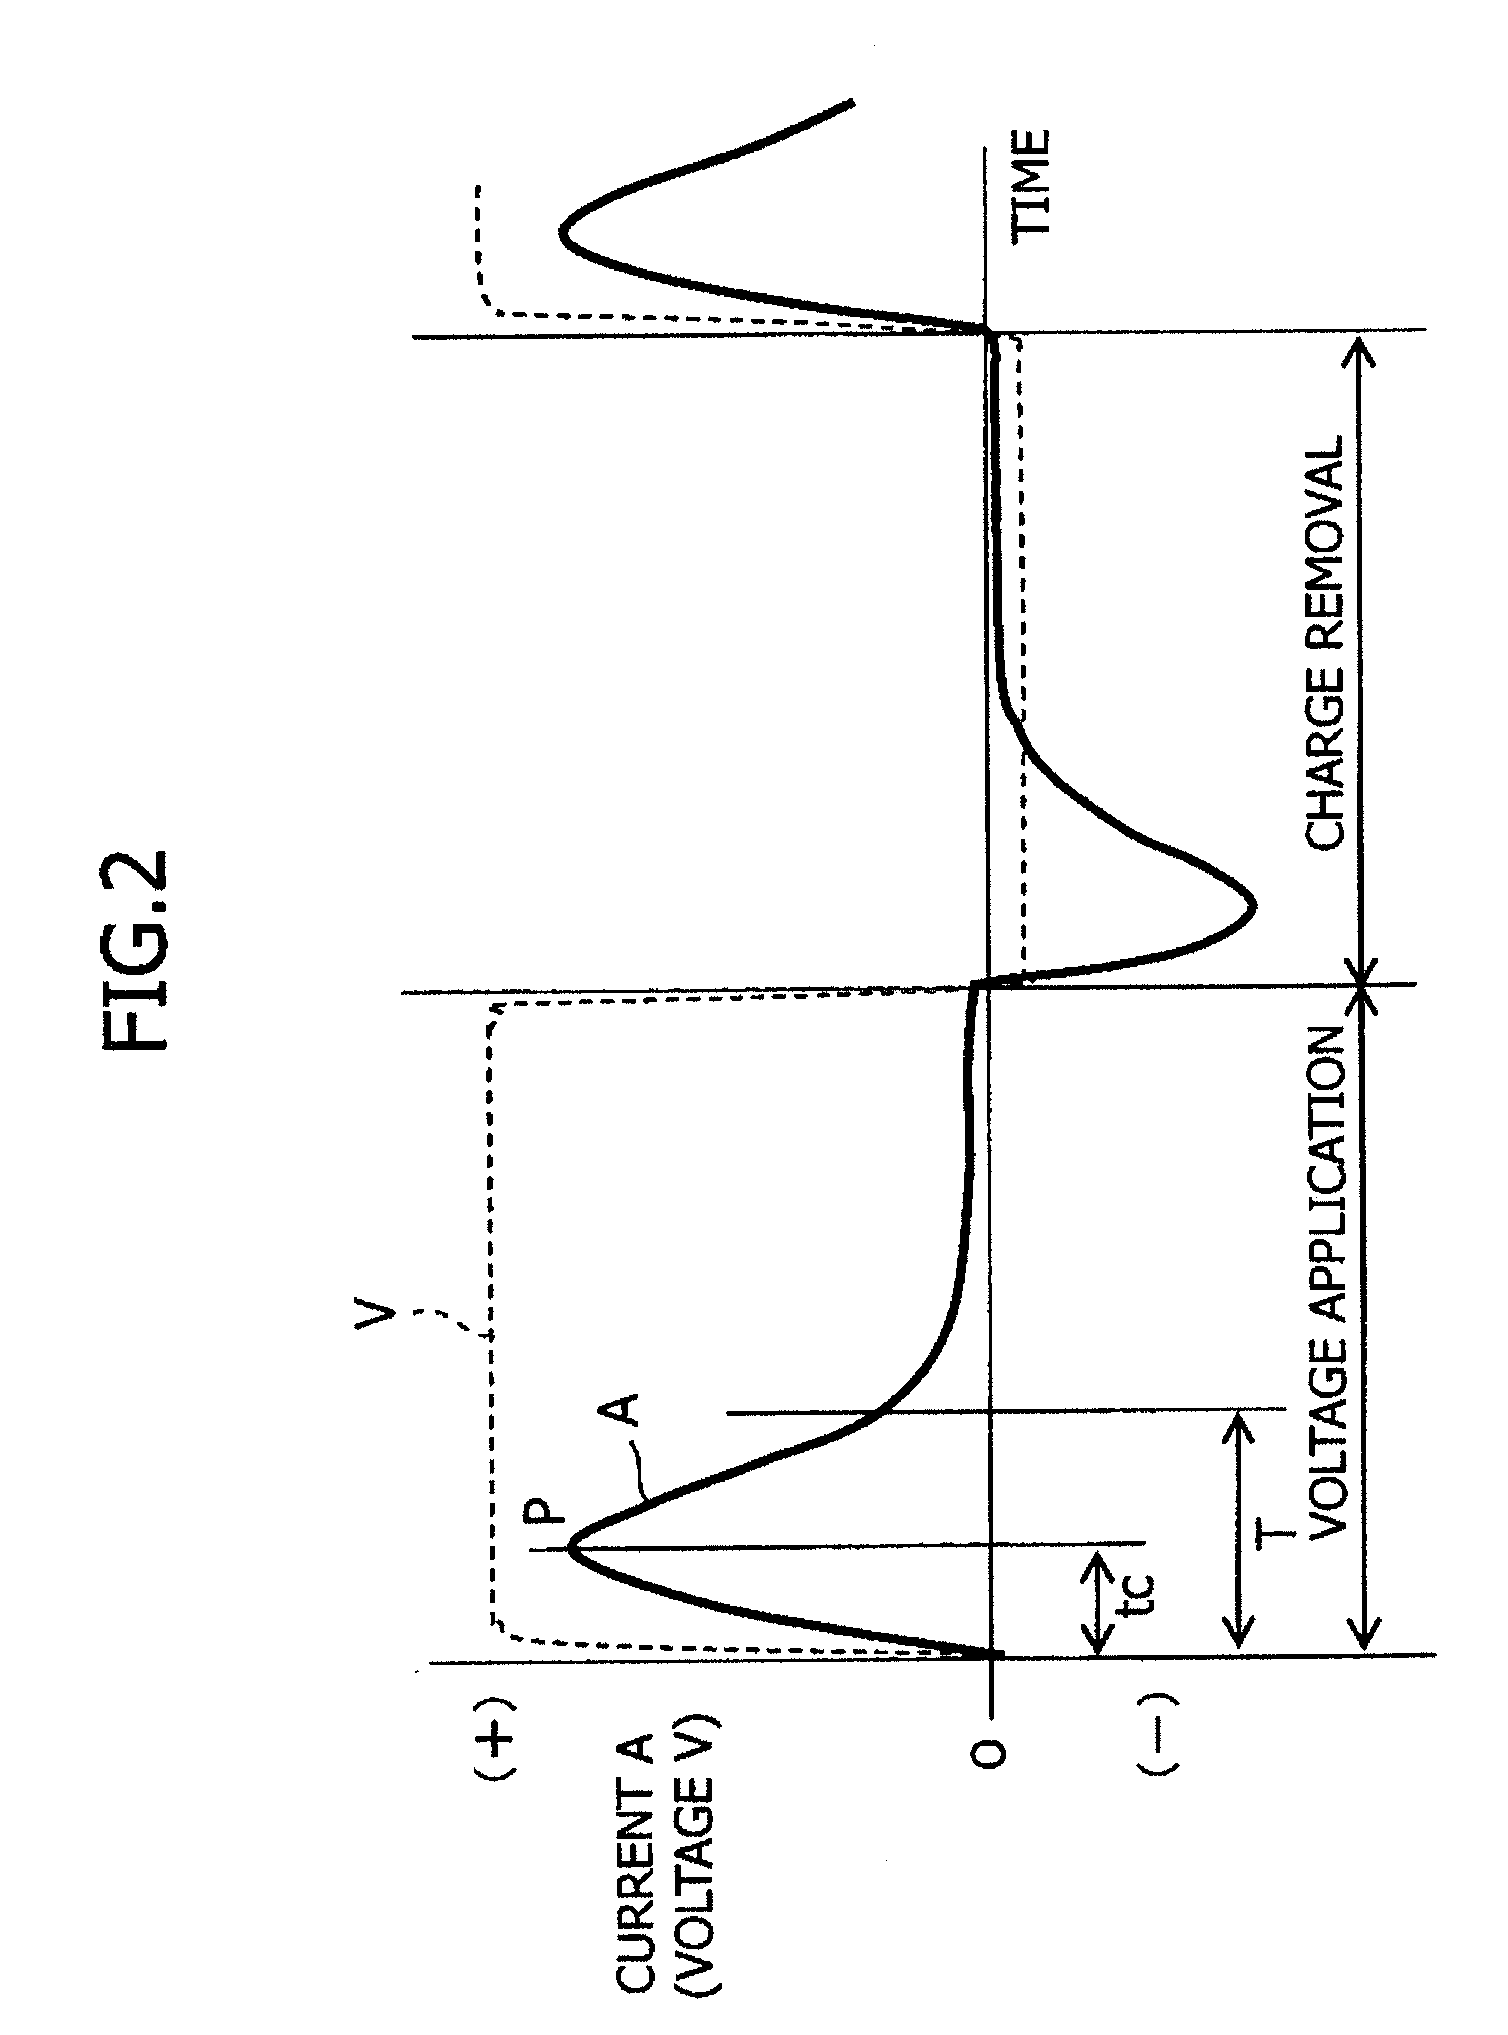 Anodizing method and apparatus